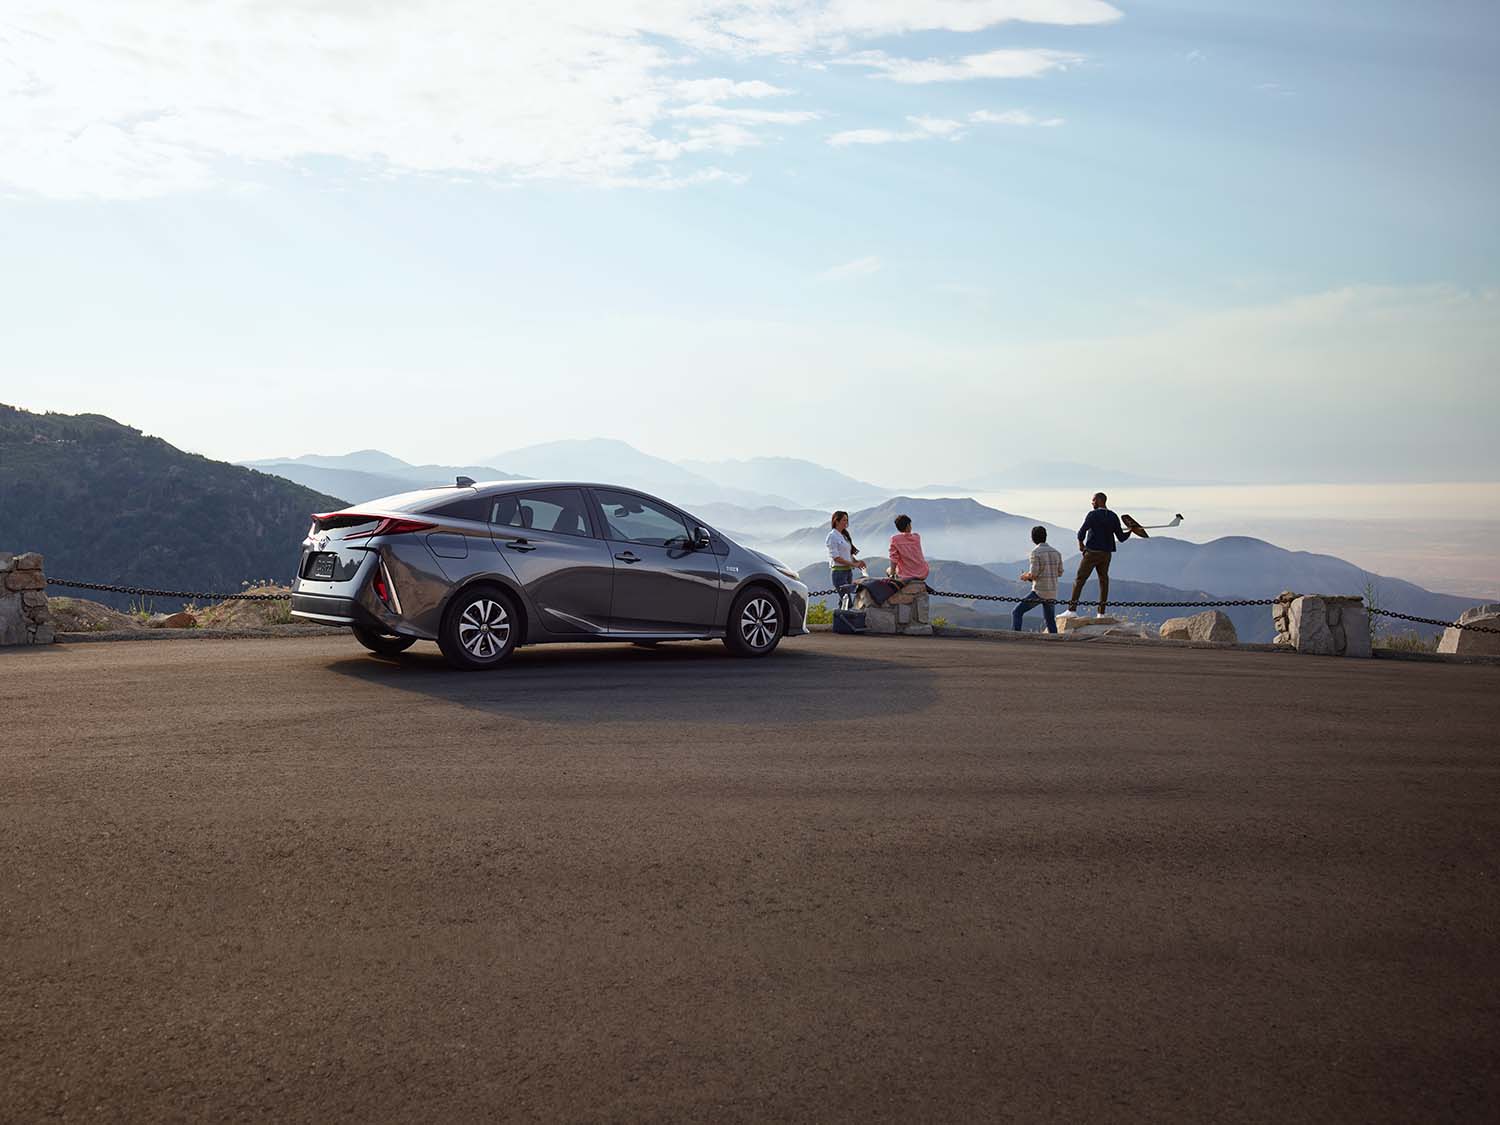 Toyota Hybrid for Everyone at Bennett Toyota | 2022 Toyota Prius Prime overlooking mountains in background